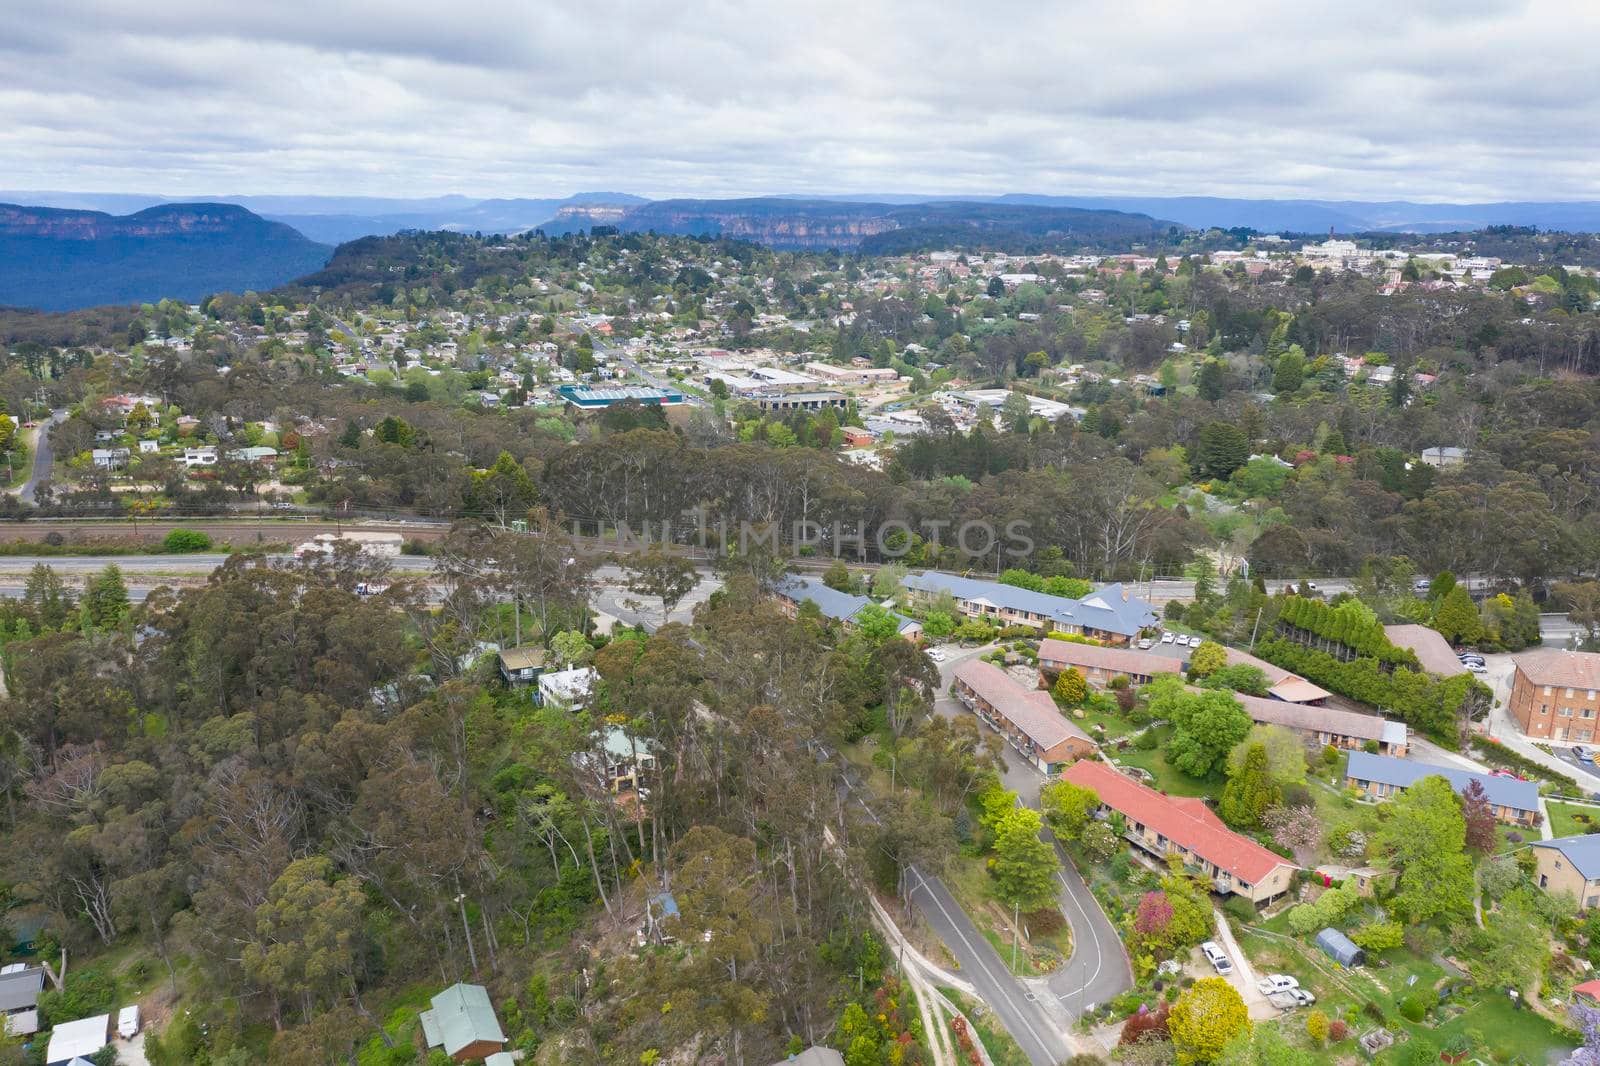 Aerial view of the township of Leura in The Blue Mountains in regional New South Wales in Australia